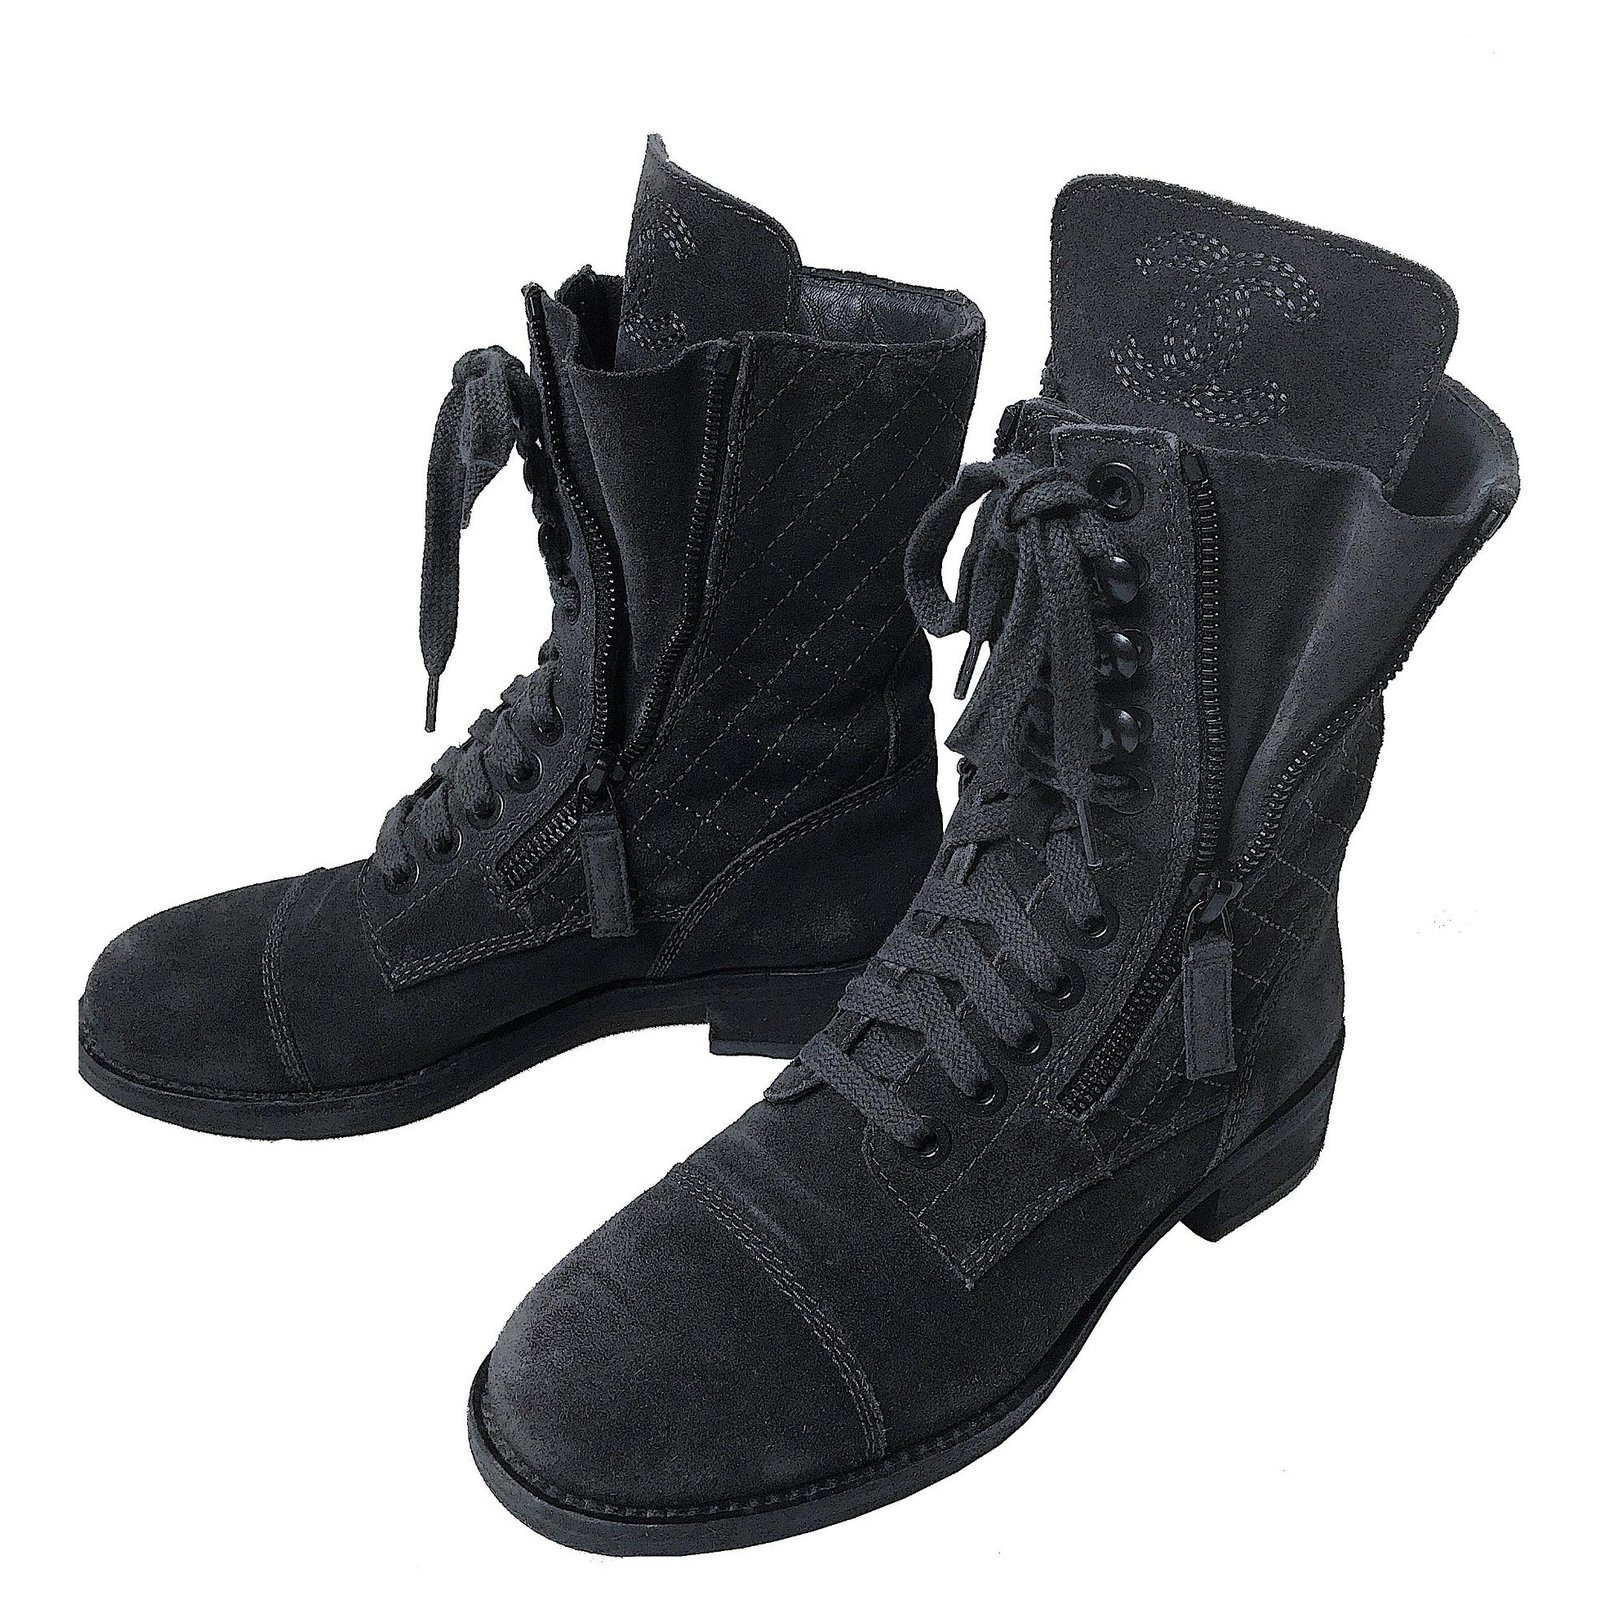 Chanel Combat boots with Box Lace ups 